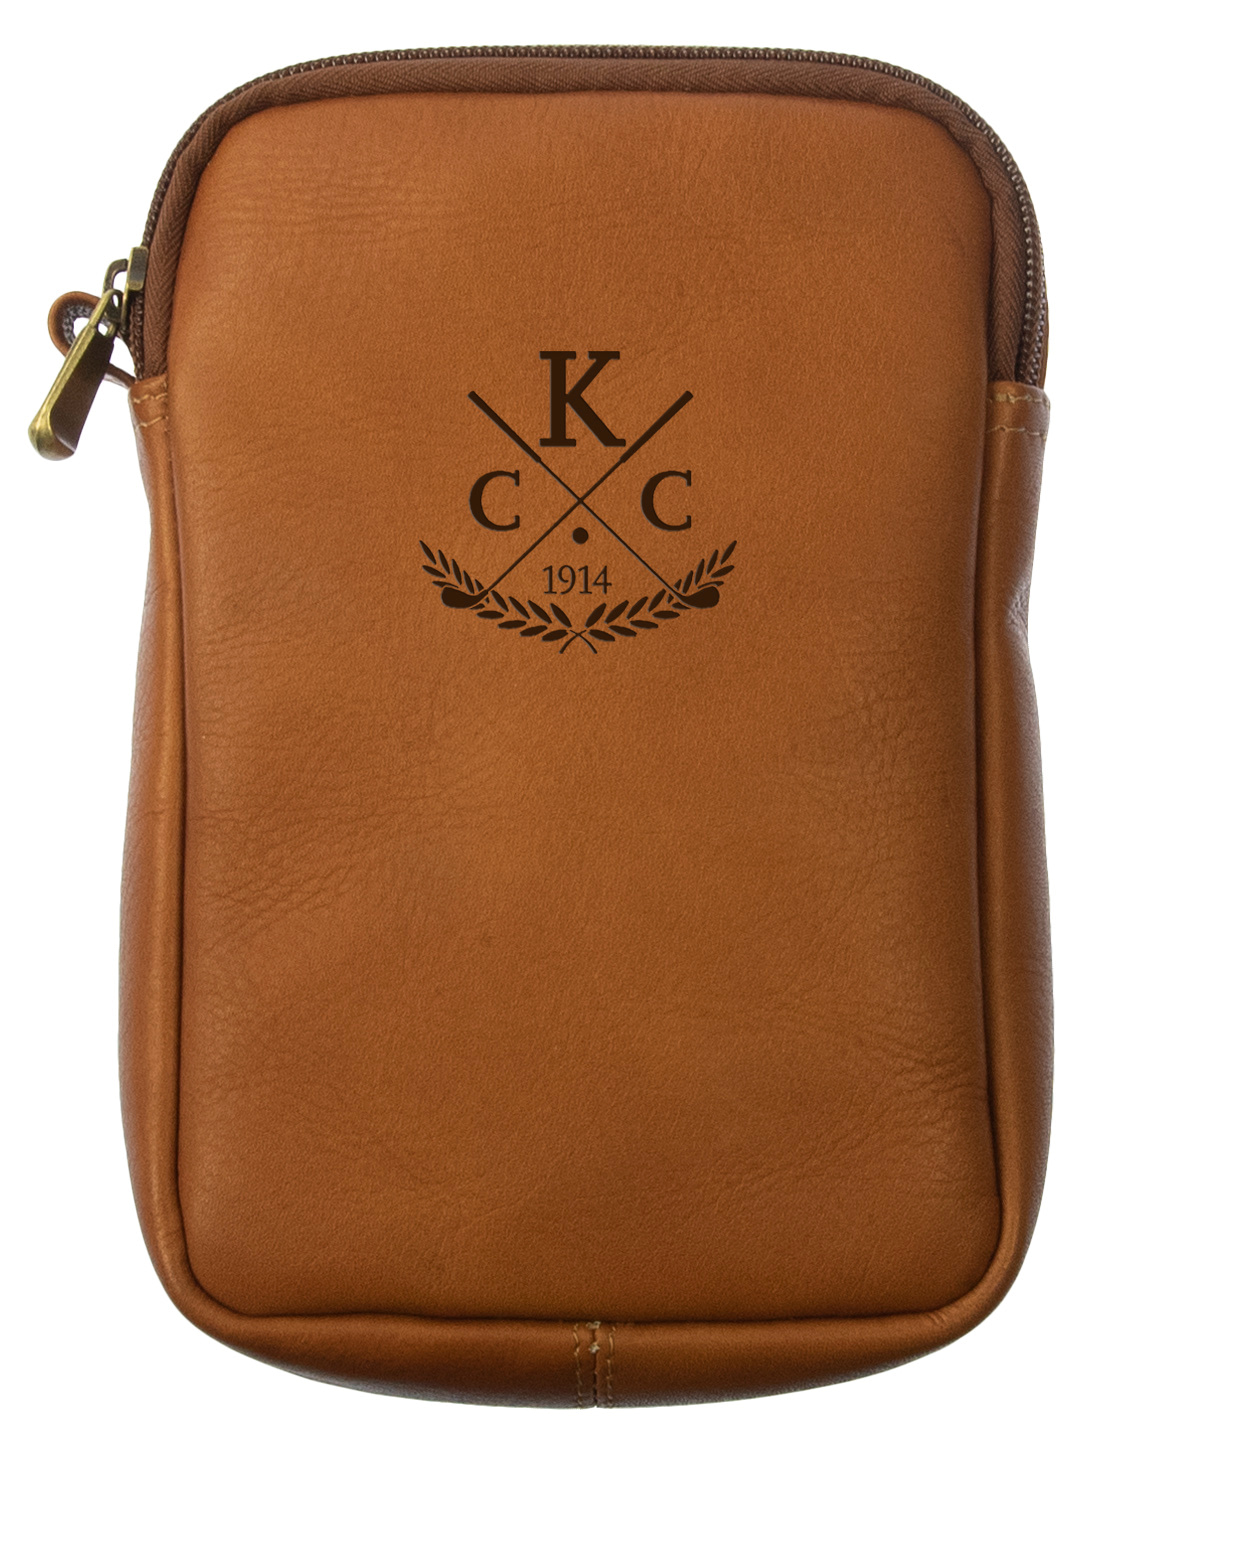 Valuables Bag engraved with logo